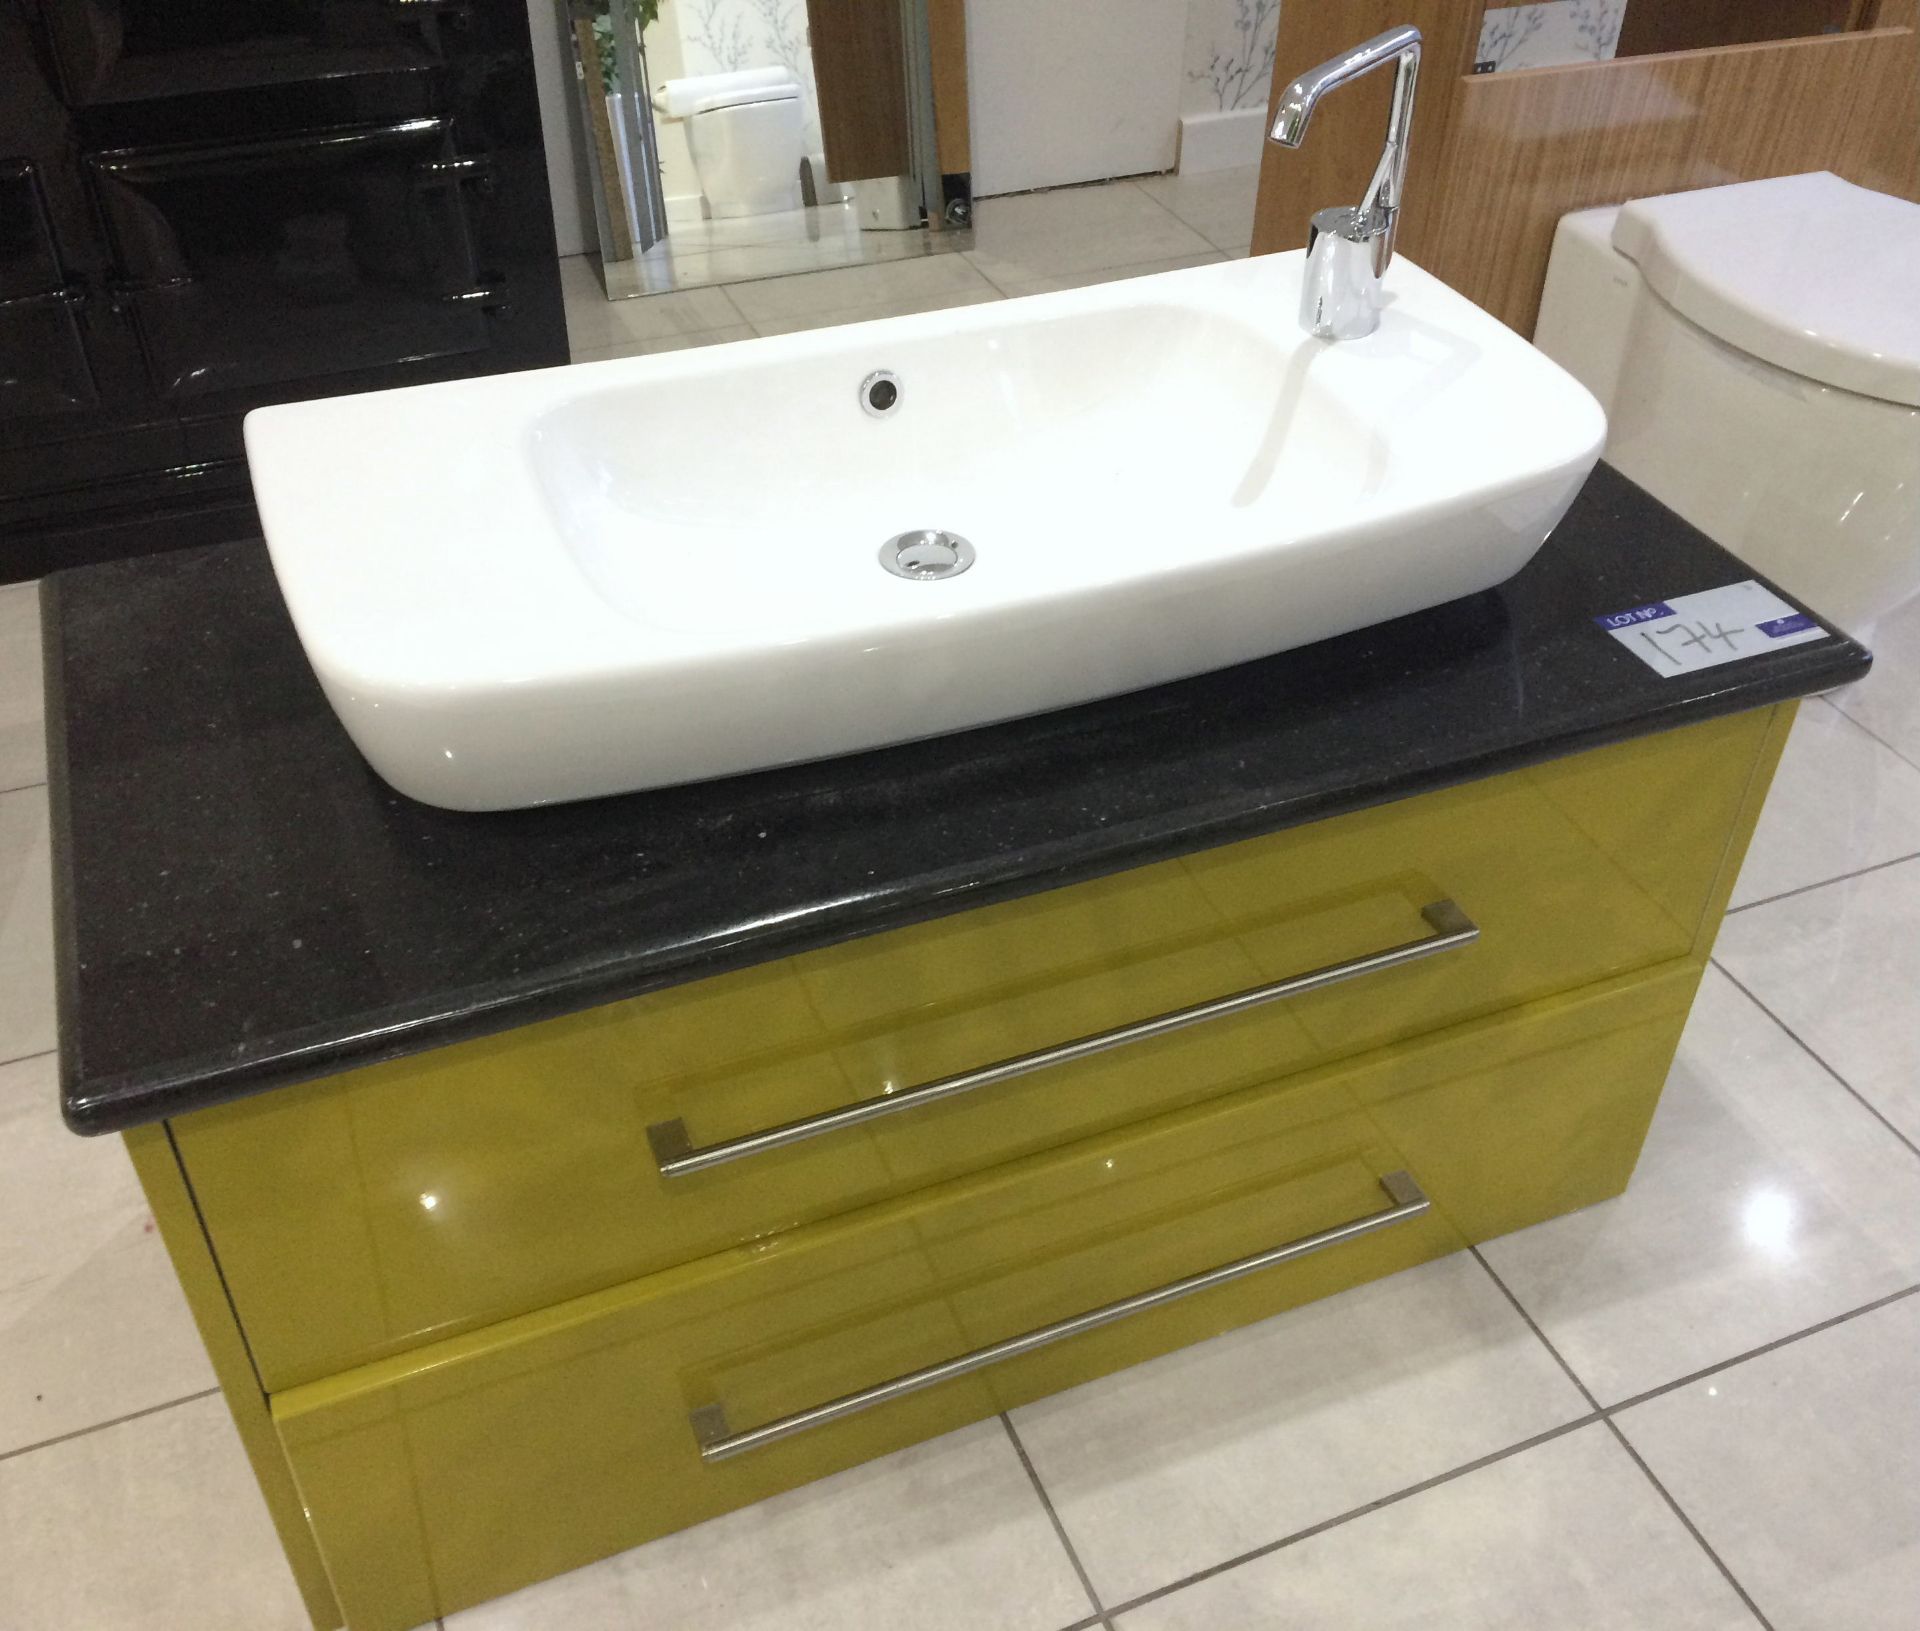 A Ceramic Wash Basin, 790mm with Chrome Mixer Tap and Waste; Mustard Green/Black Glass 2 drawer